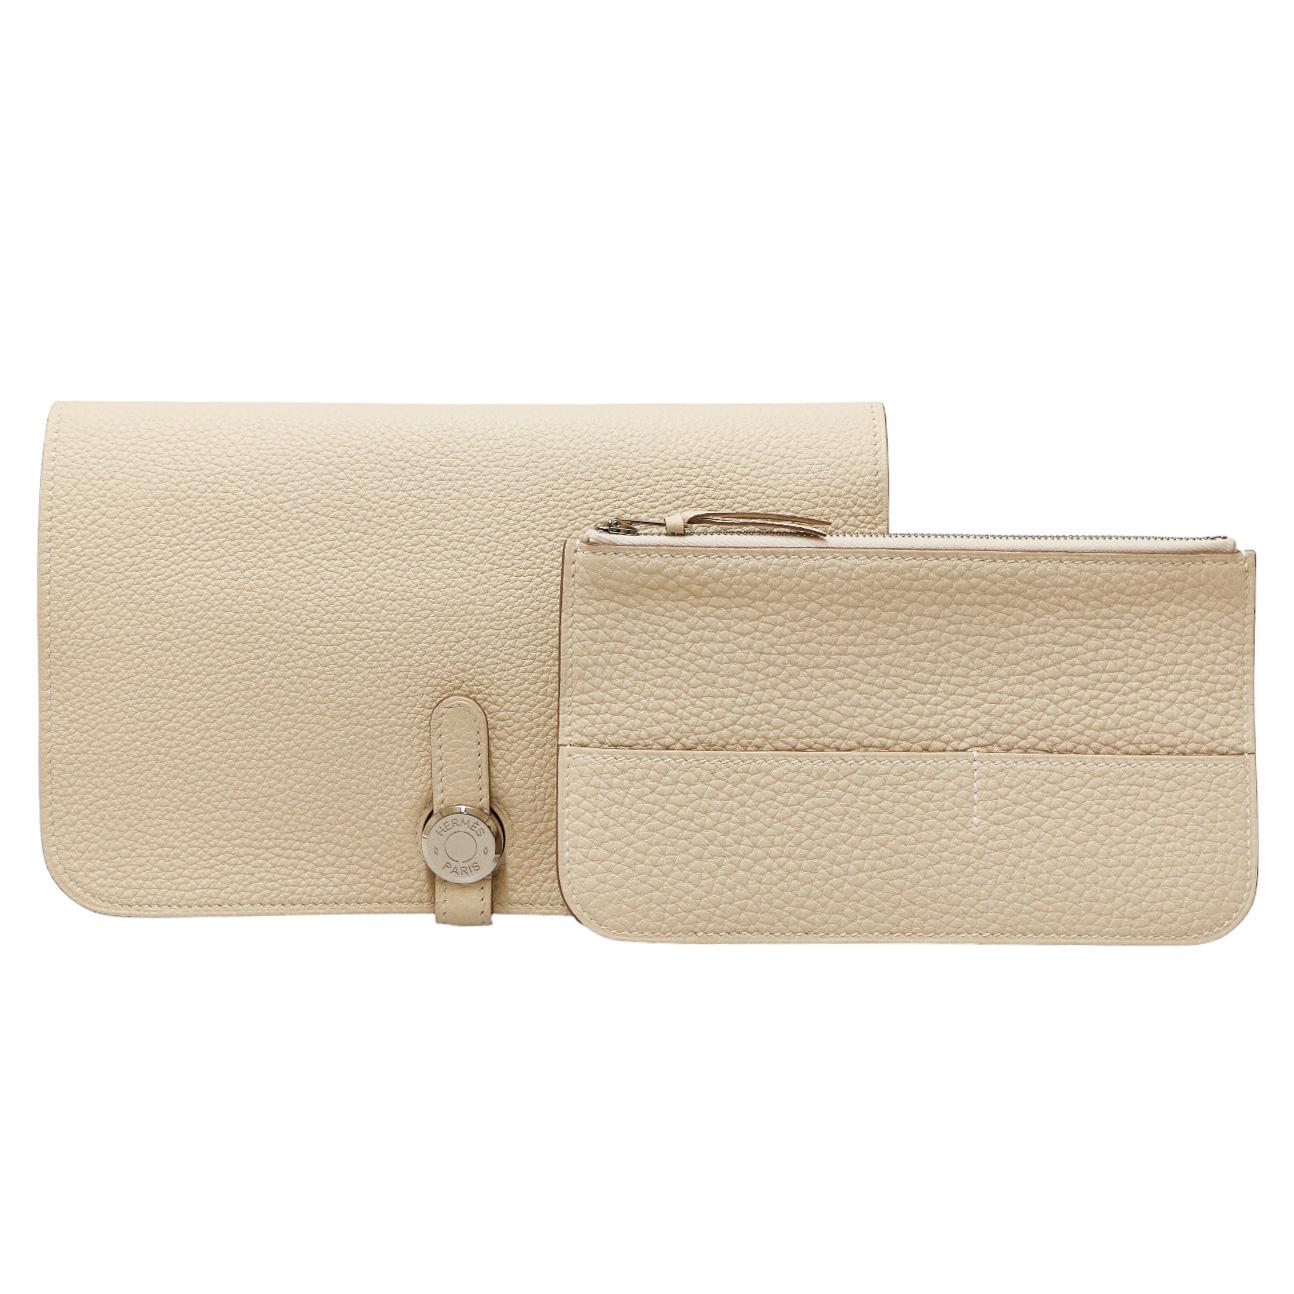 Amazing HERMES Dogon Duo leather togo wallet
Condition : never worn
Made in France
Collection : wallet
Sex : unisex
Material: togo leather
Interior: smooth lambskin lining
Color: chalk
Dimensions: 20.1 x 12.5 x 0.4 cm
Letter: B B
Year: